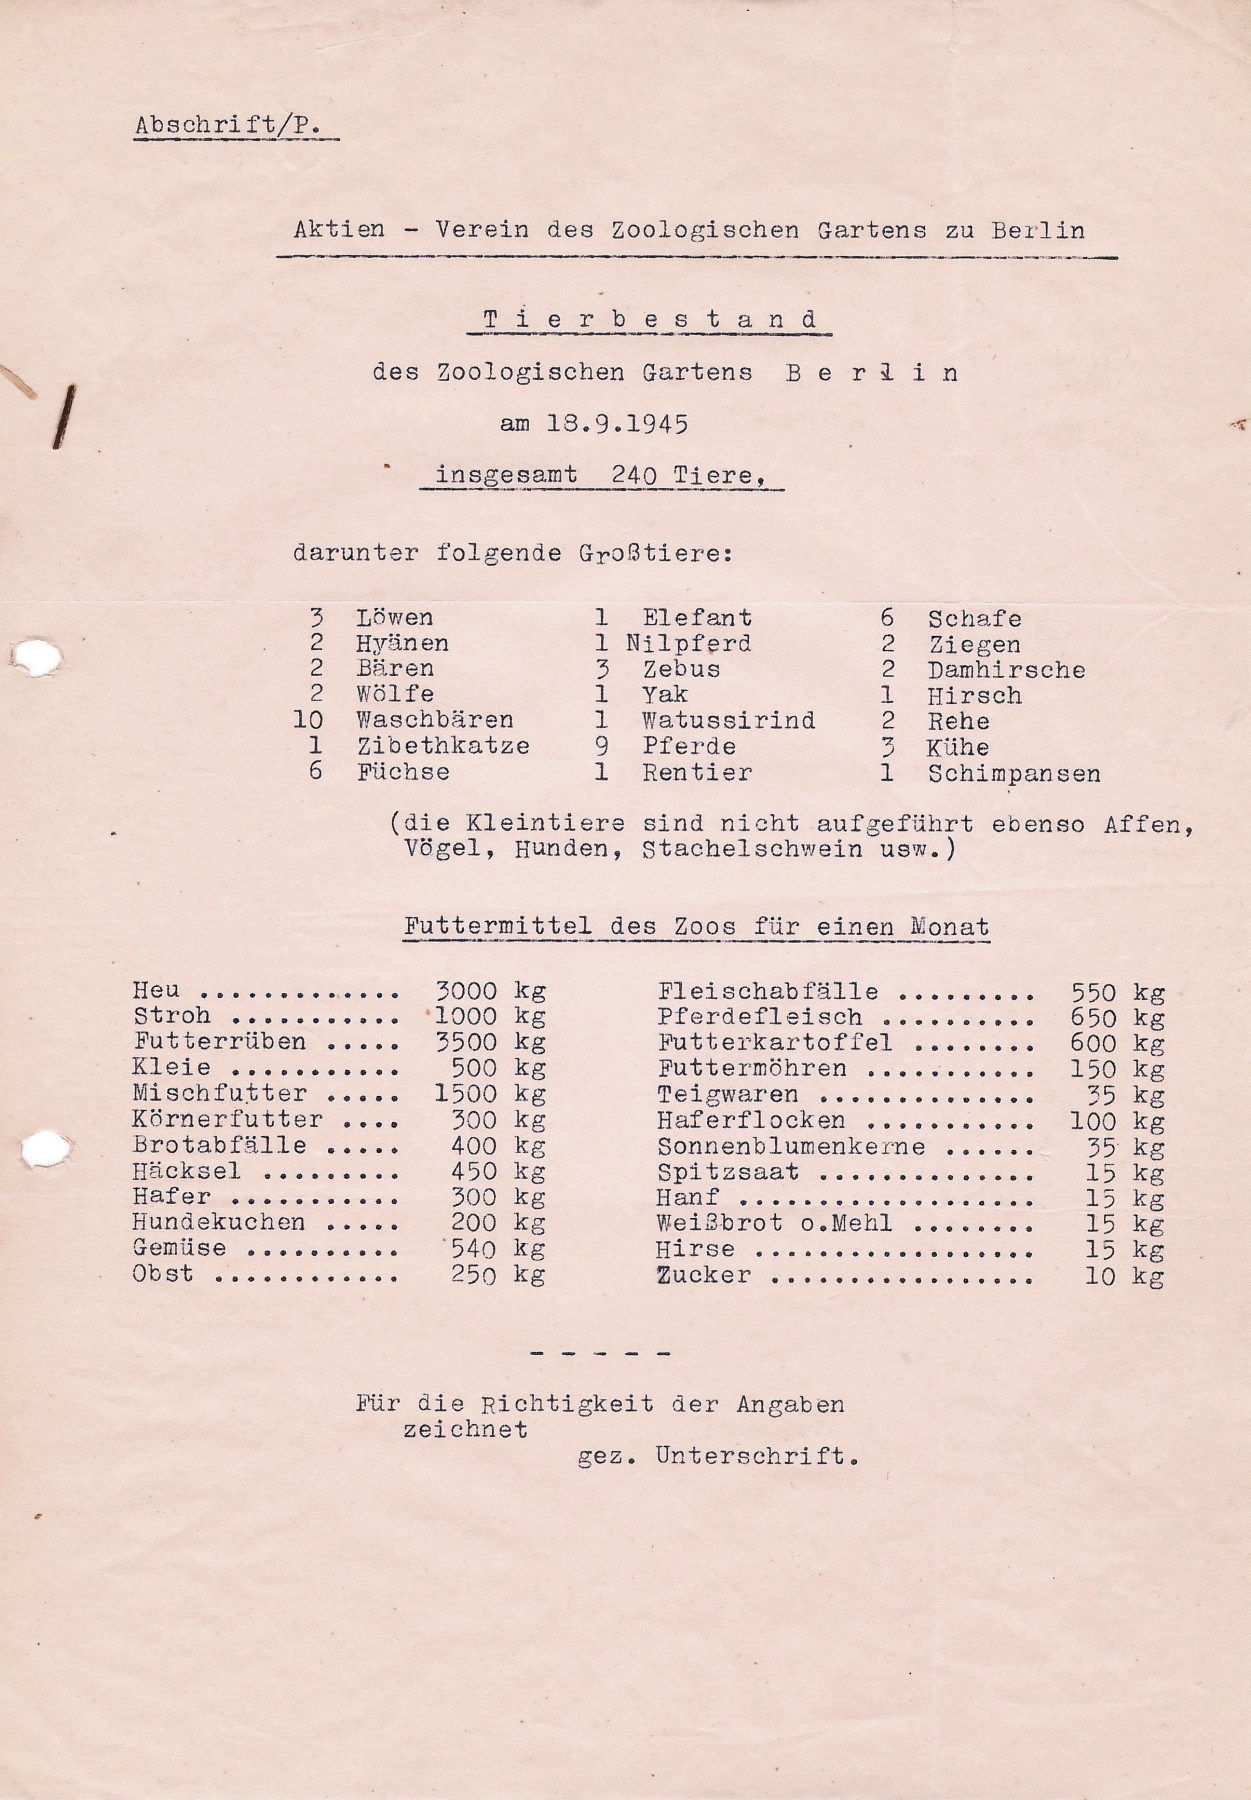 Typewritten copy with headings: Animal population; Feed for the zoo for one month.